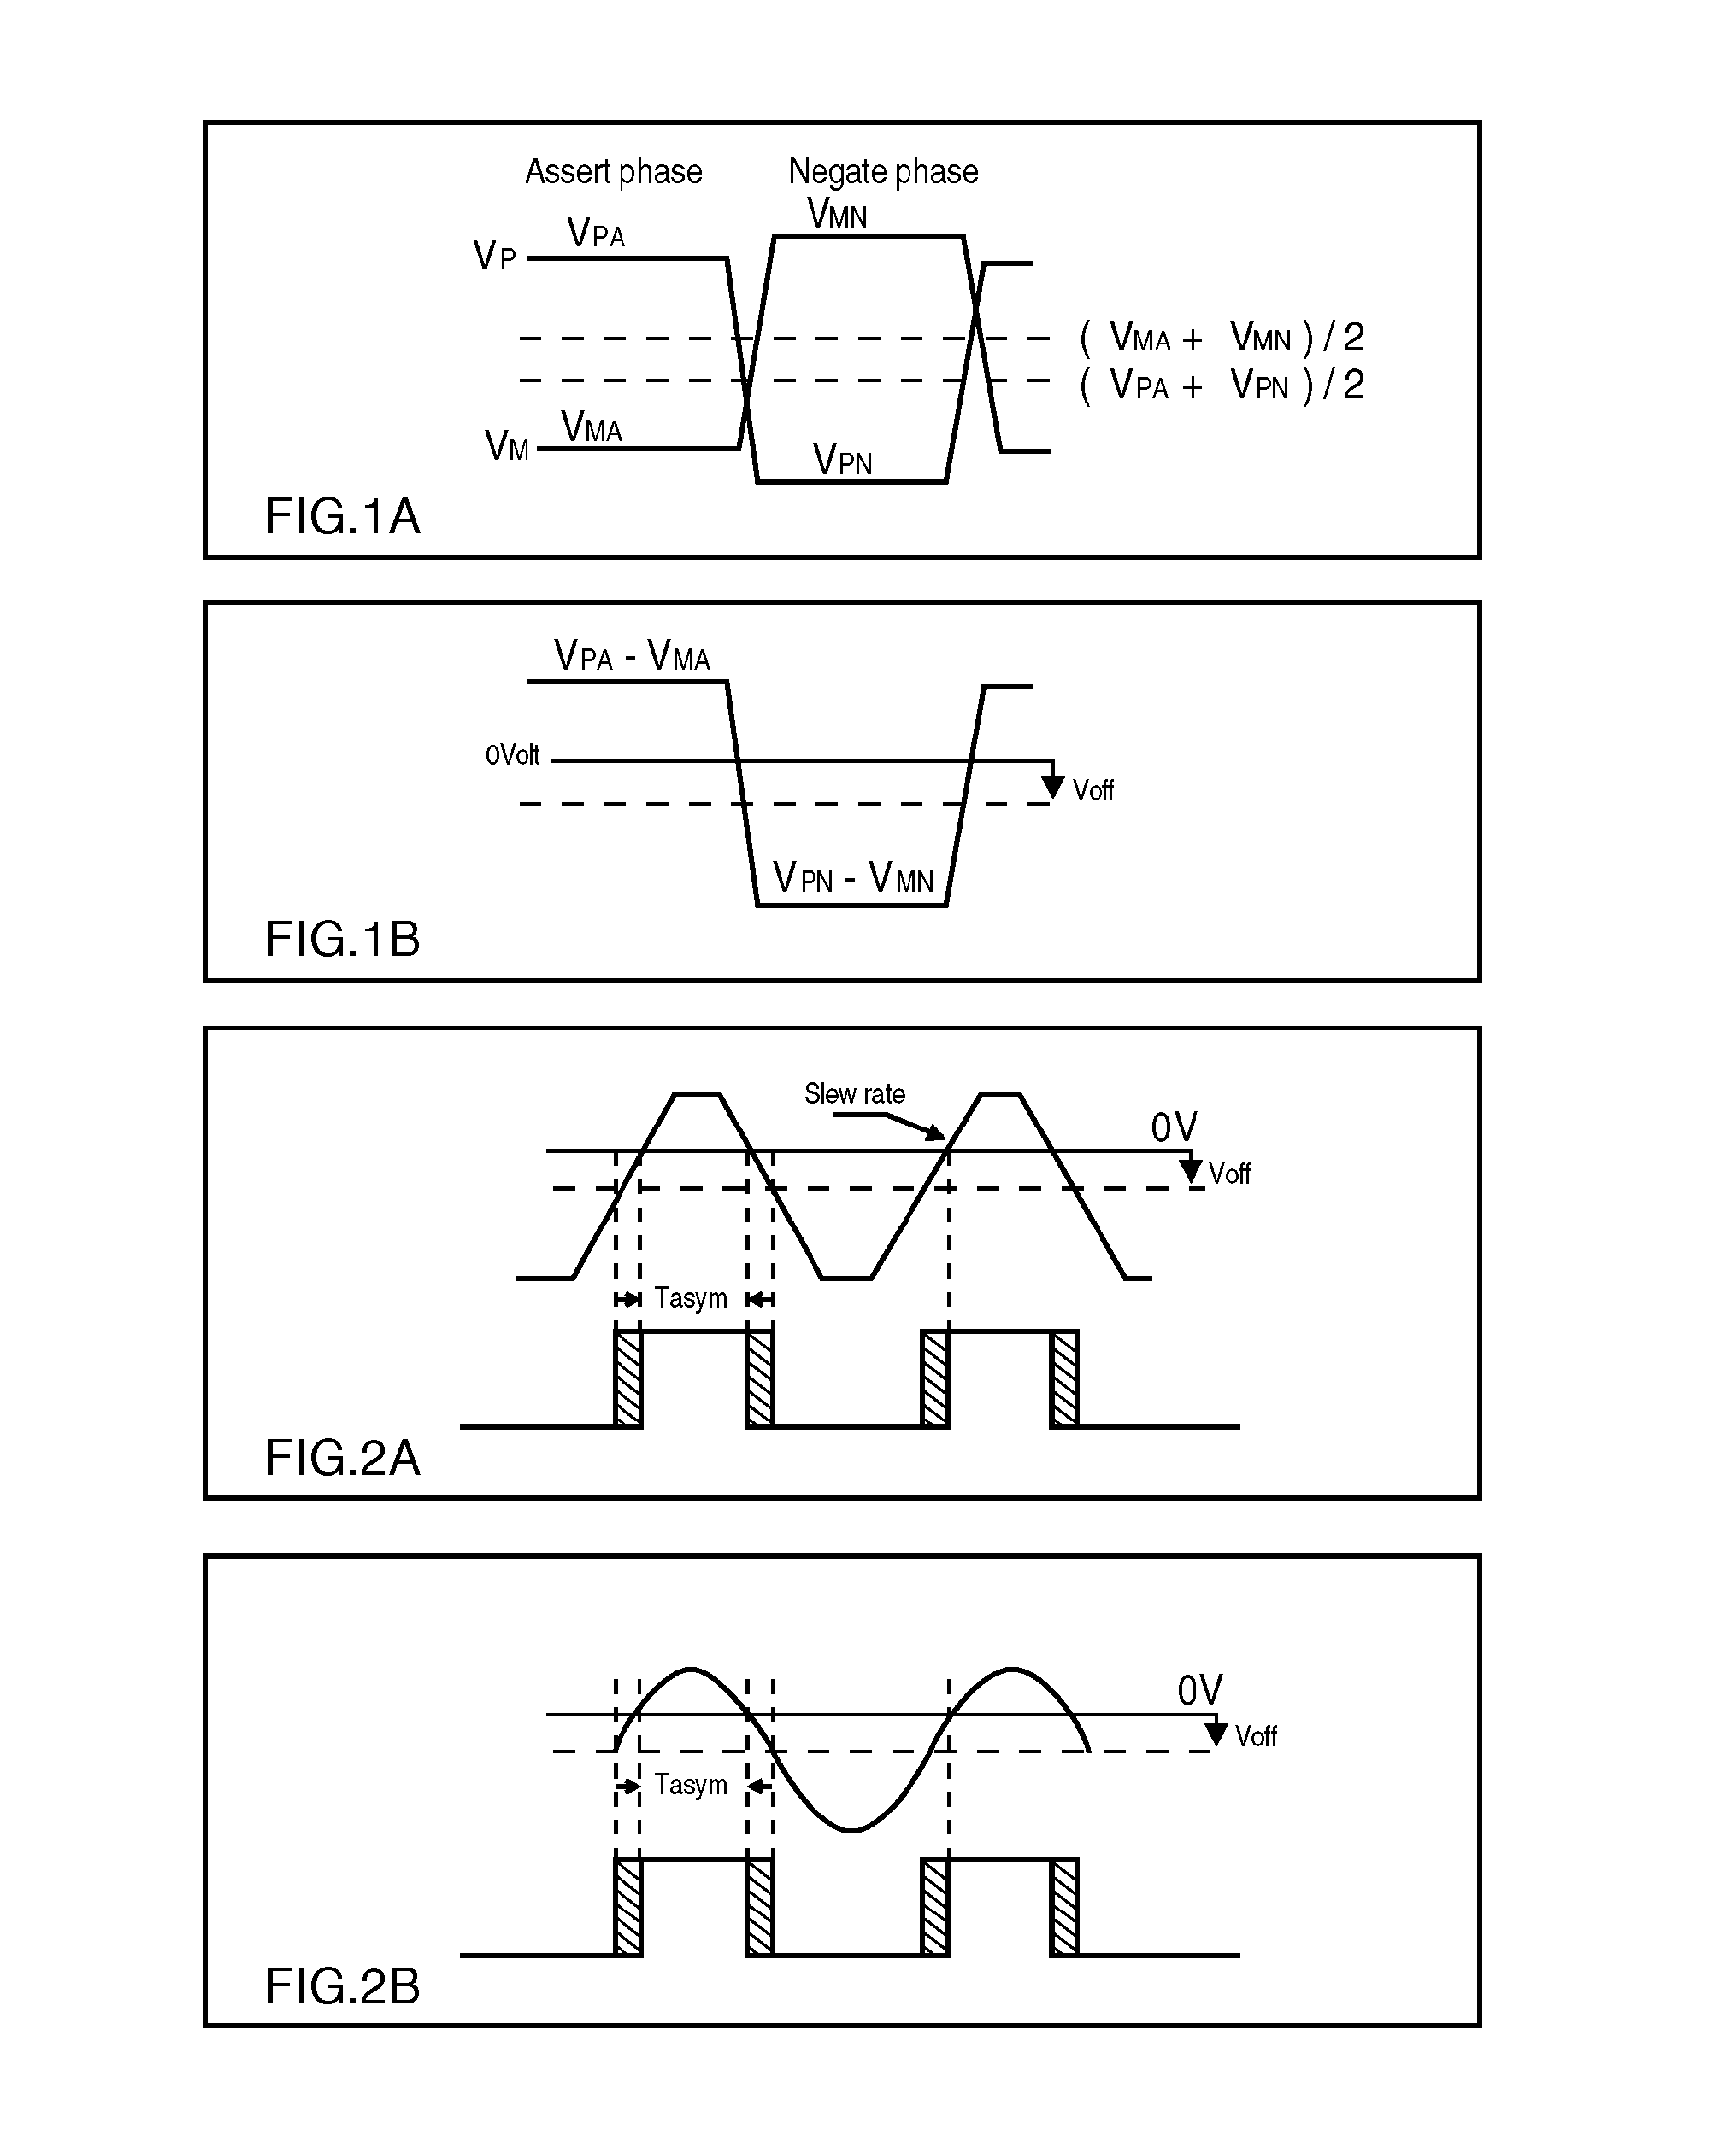 Receiver having full signal path differential offset cancellation capabilities